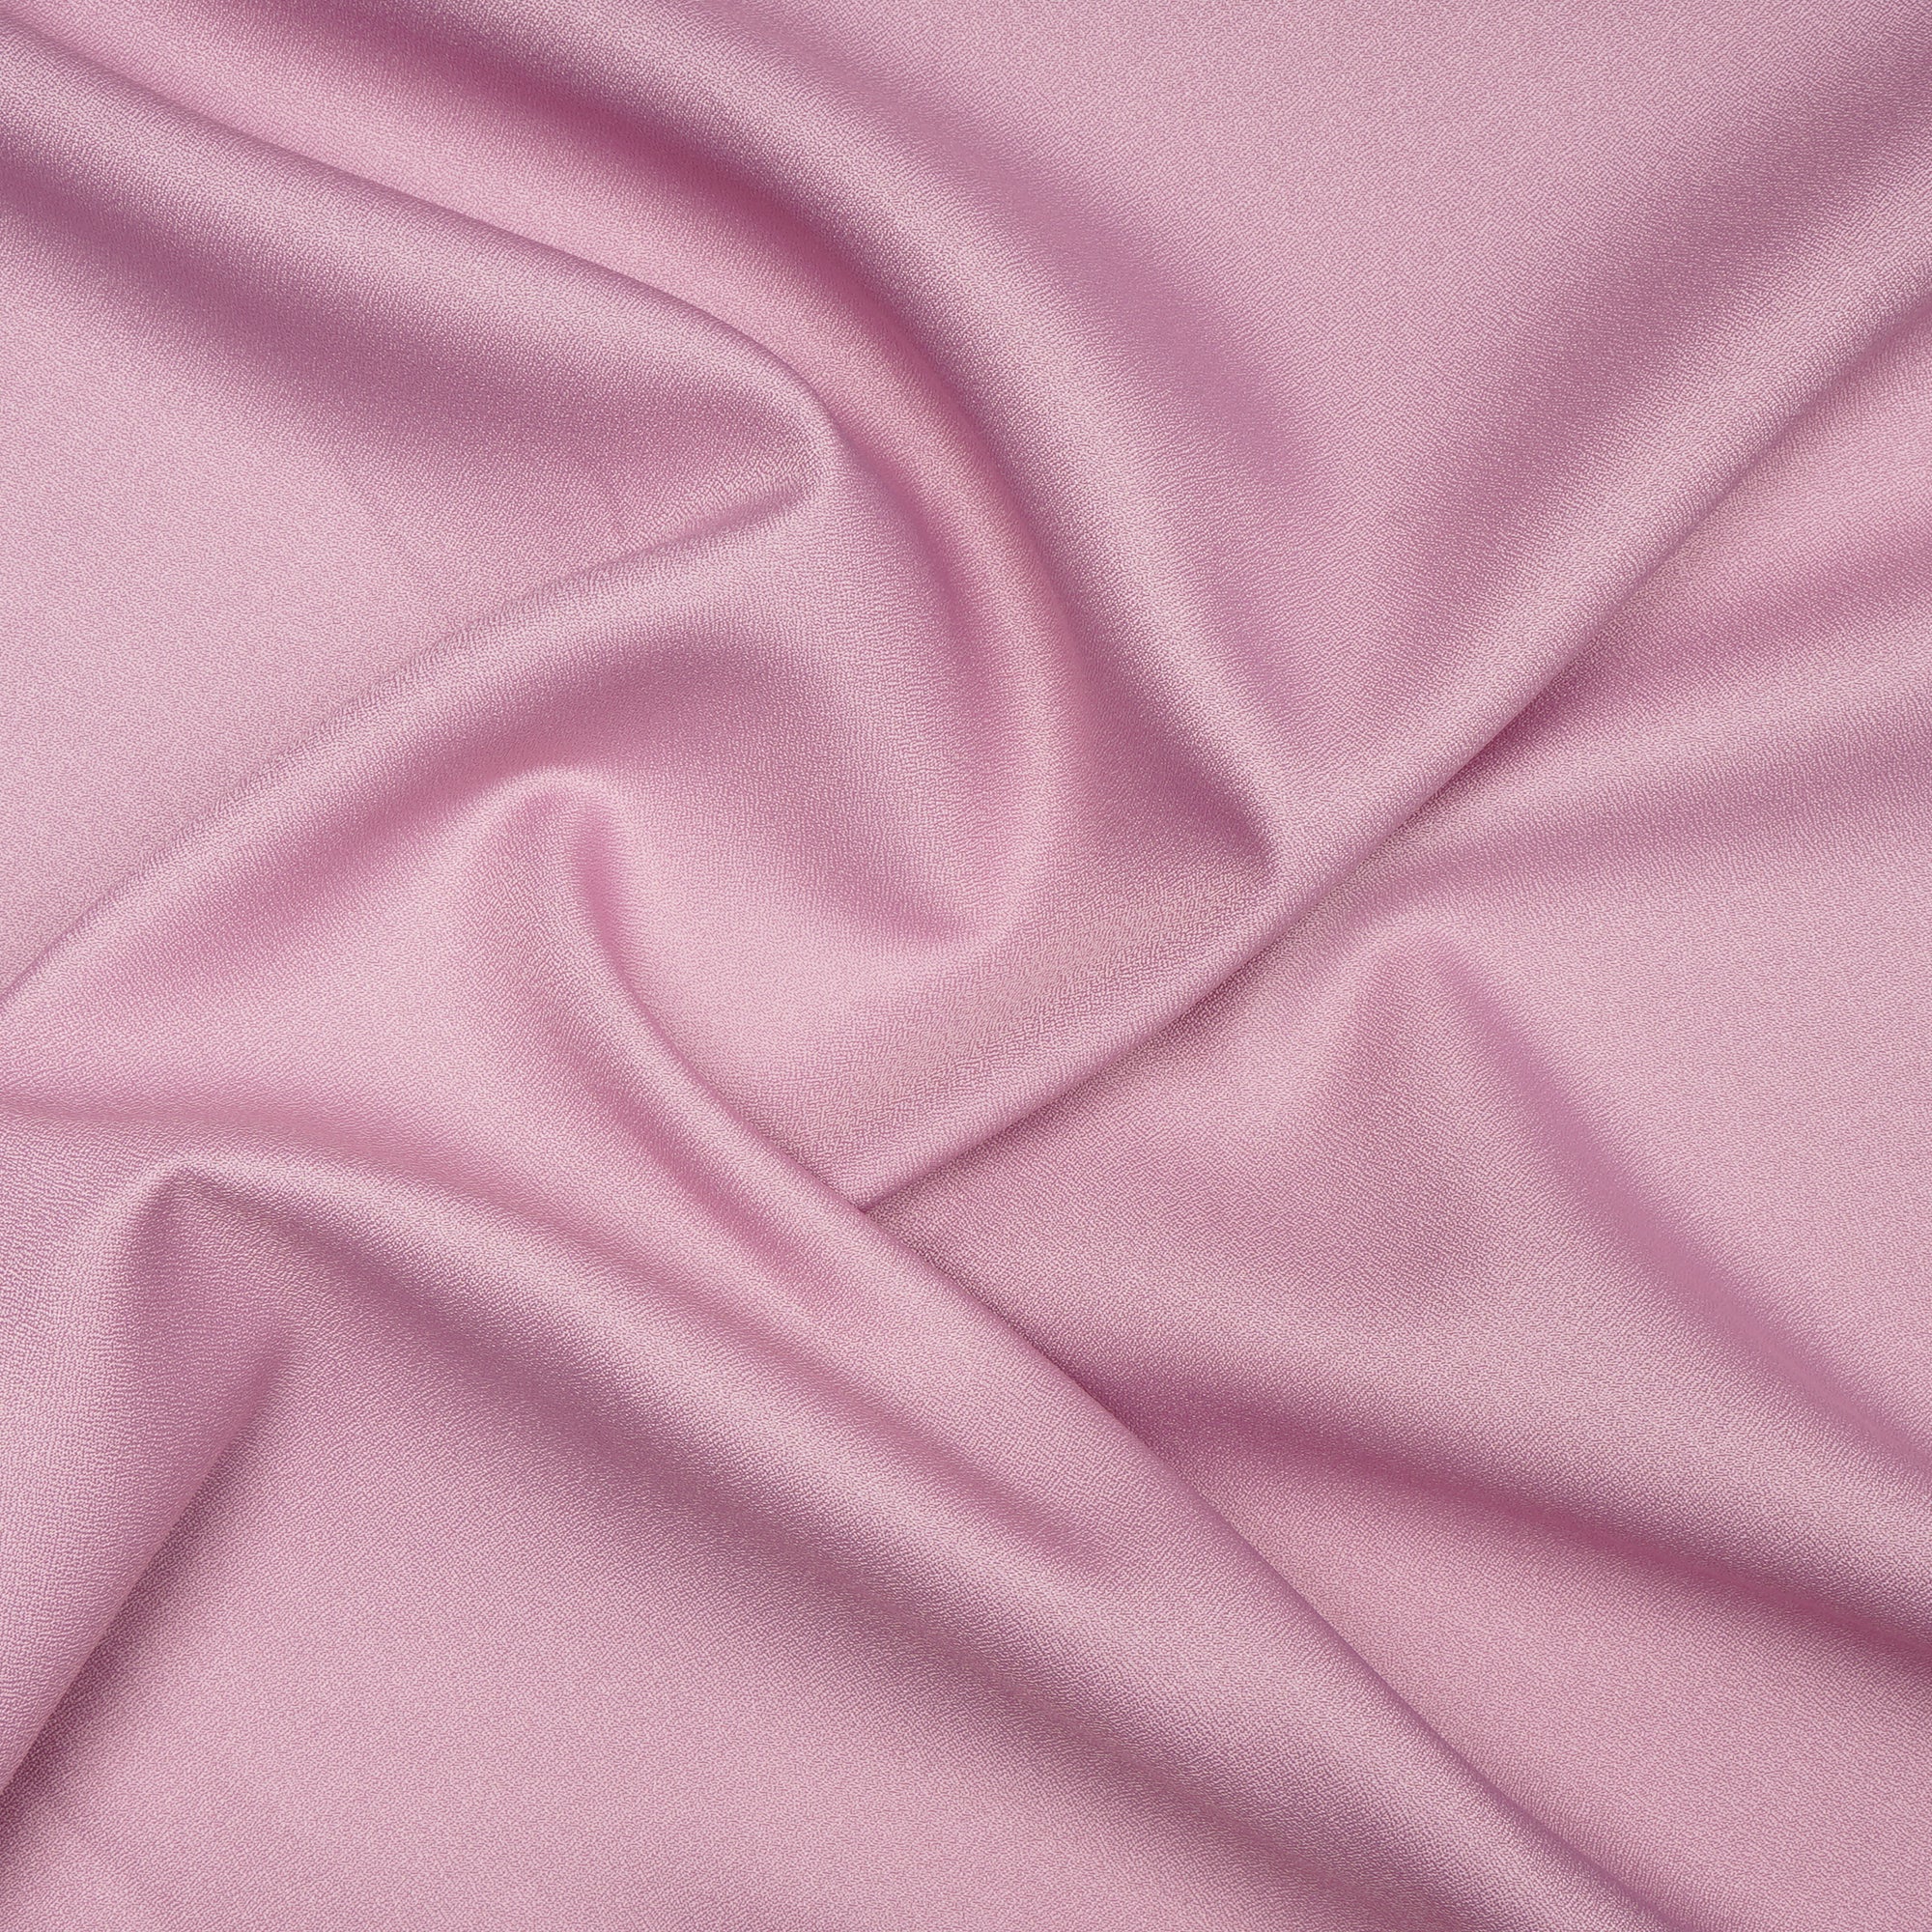 Pale Rose Solid Dyed Imported Amazon Moss Crepe Fabric (60" Width)